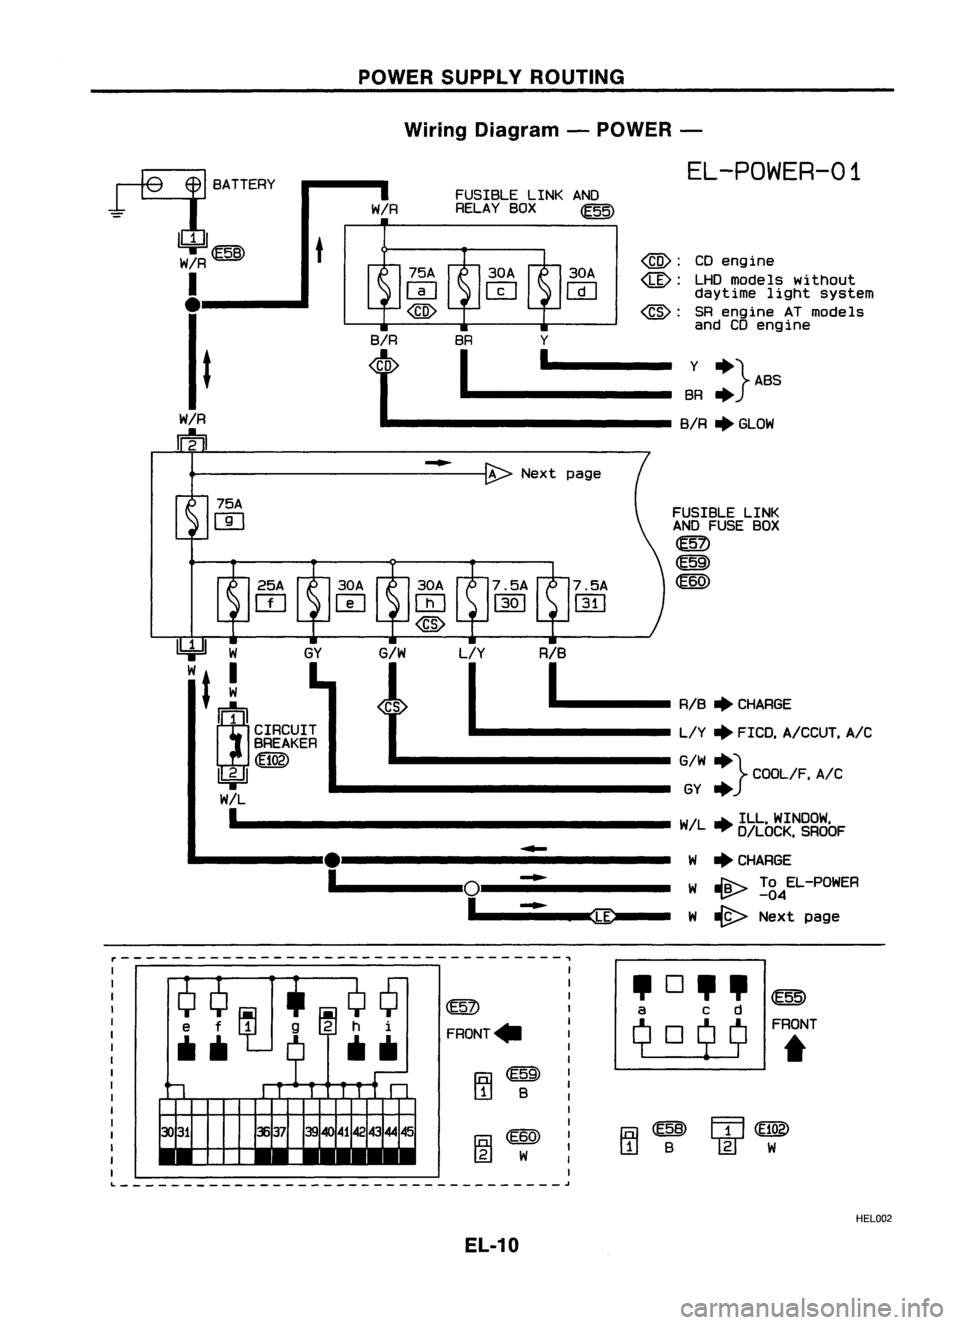 NISSAN ALMERA N15 1995  Service Manual POWERSUPPLY ROUTING
Wiring Diagram -POWER -
~

.-------------- 
1-----0--------- 
1._.-__-

~:--. 
CD
engine
LHD models without
daytime lightsystem
SR engine ATmodels
and CDengine
EL-POWER-01
FUSIBLE 